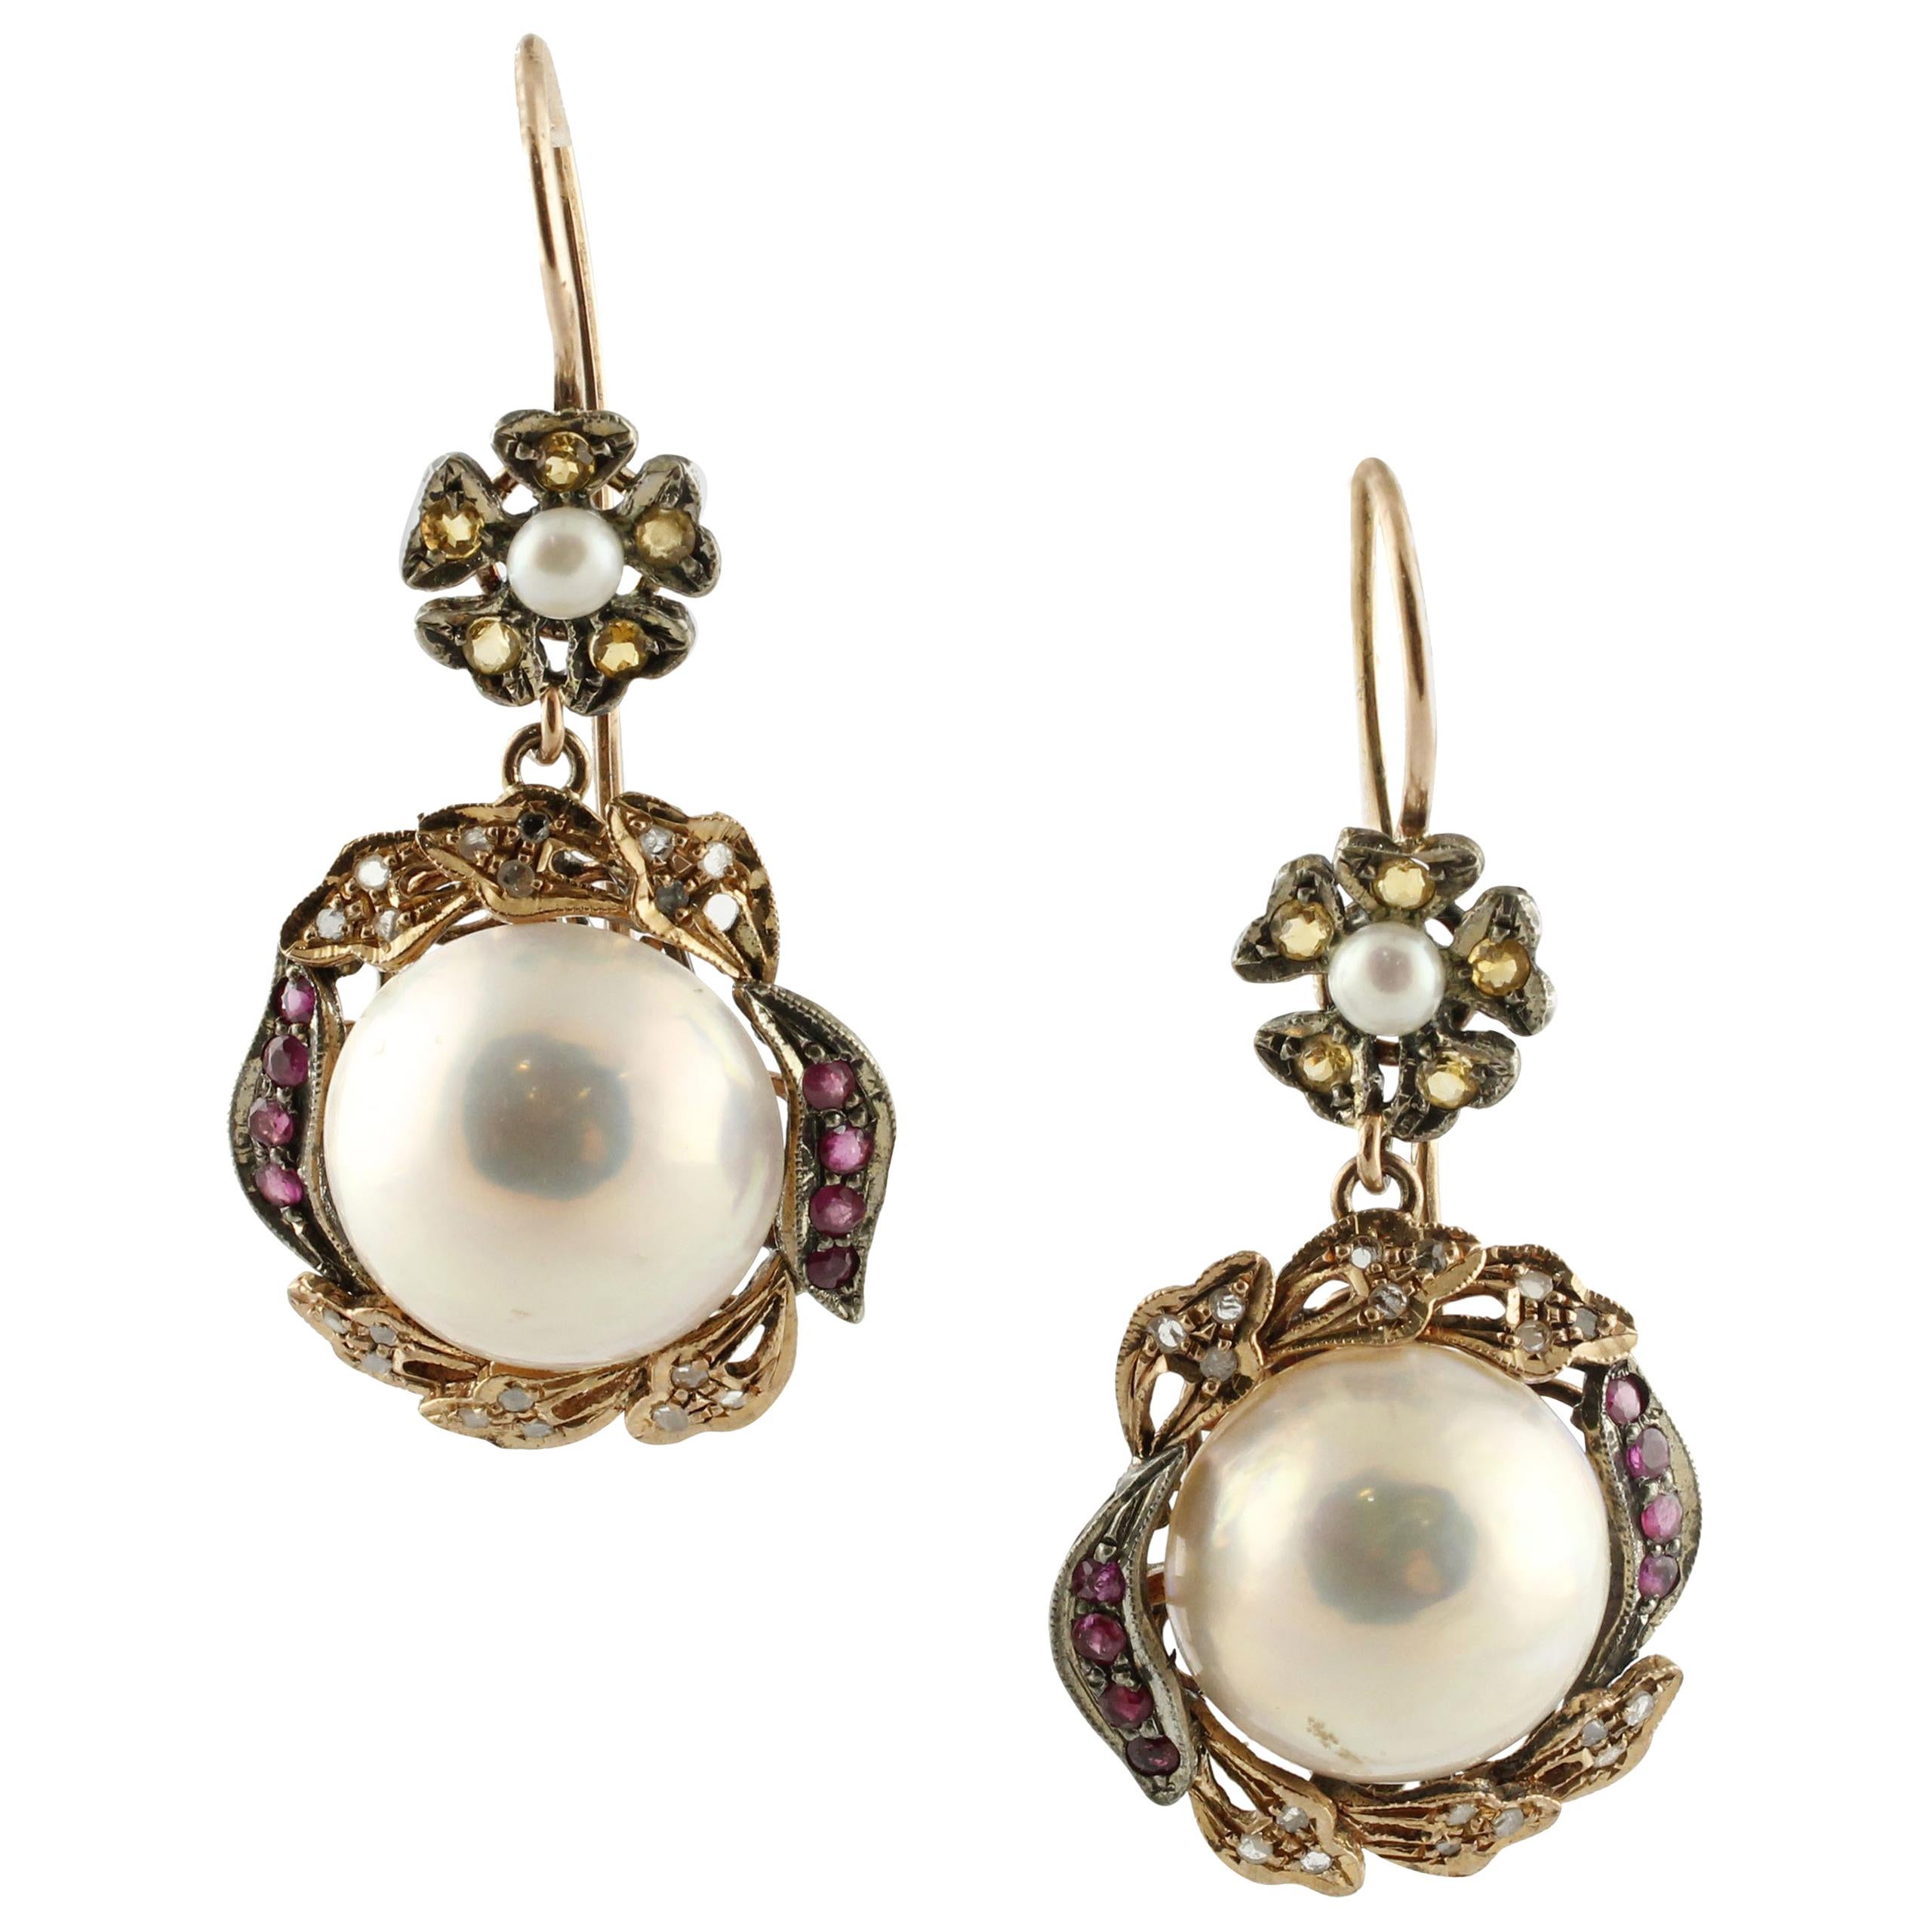 Diamonds Rubies Yellow Sapphires Pearls Rose Gold and Silver Earrings